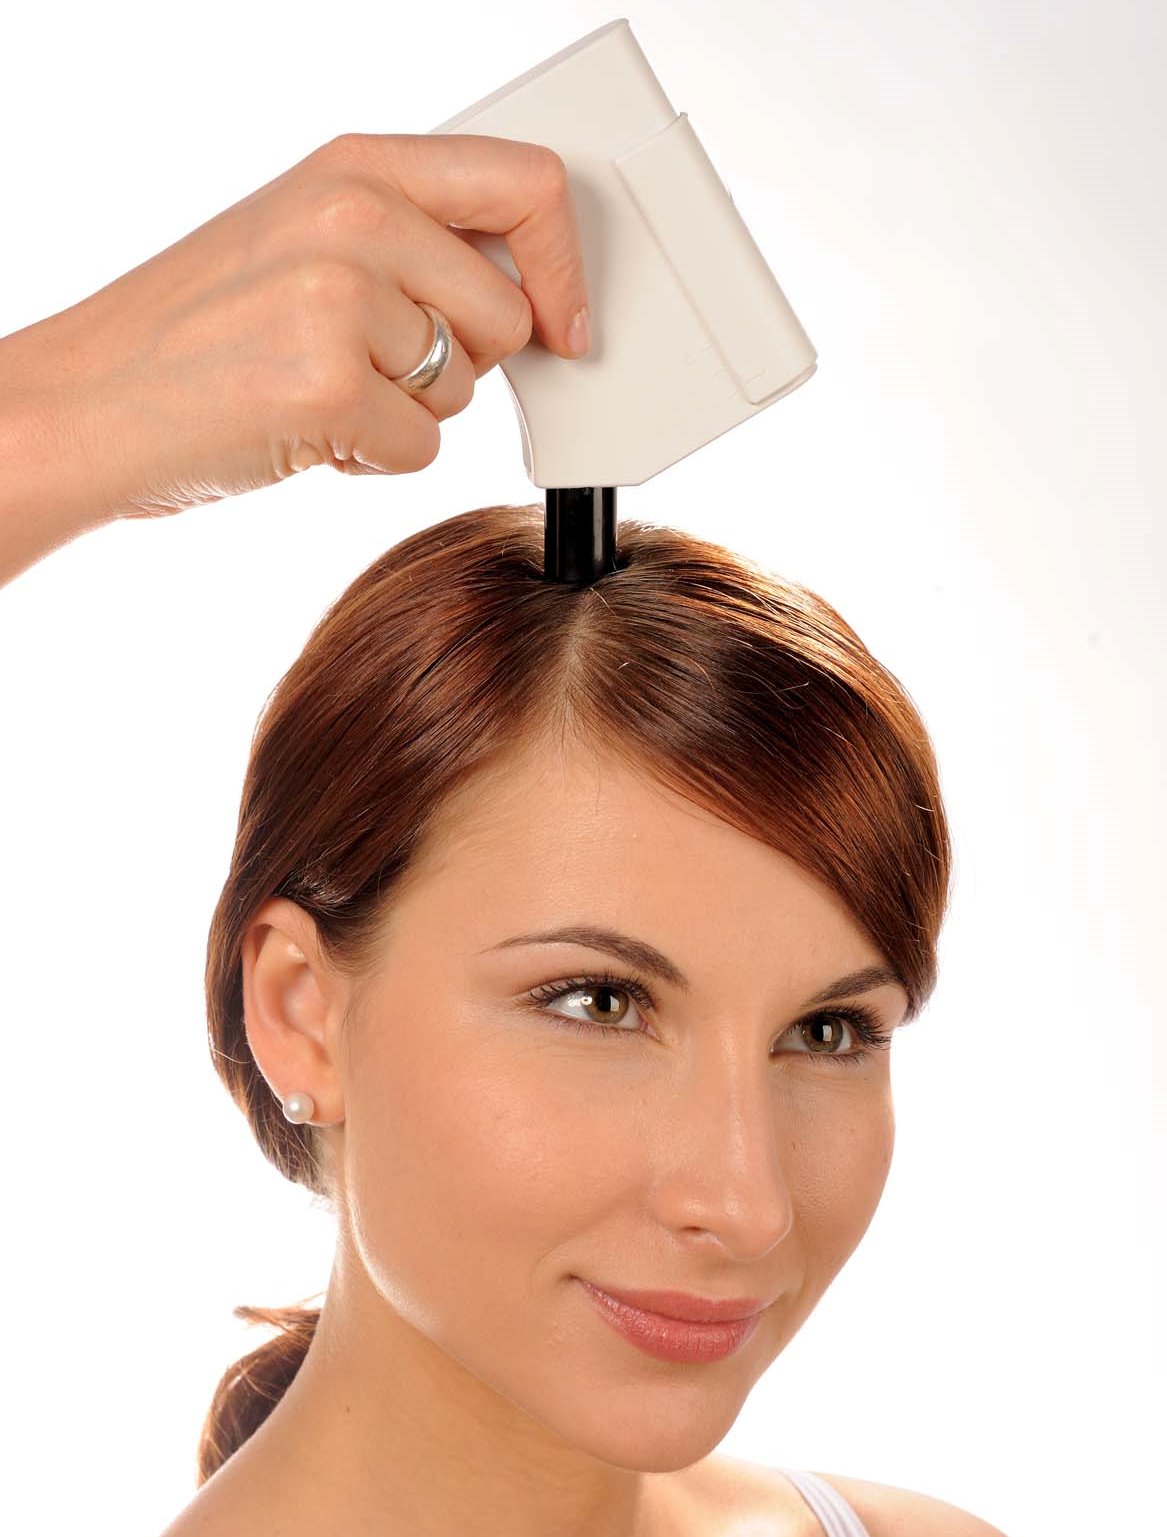 Sebumeter® can be used on hair and scalp